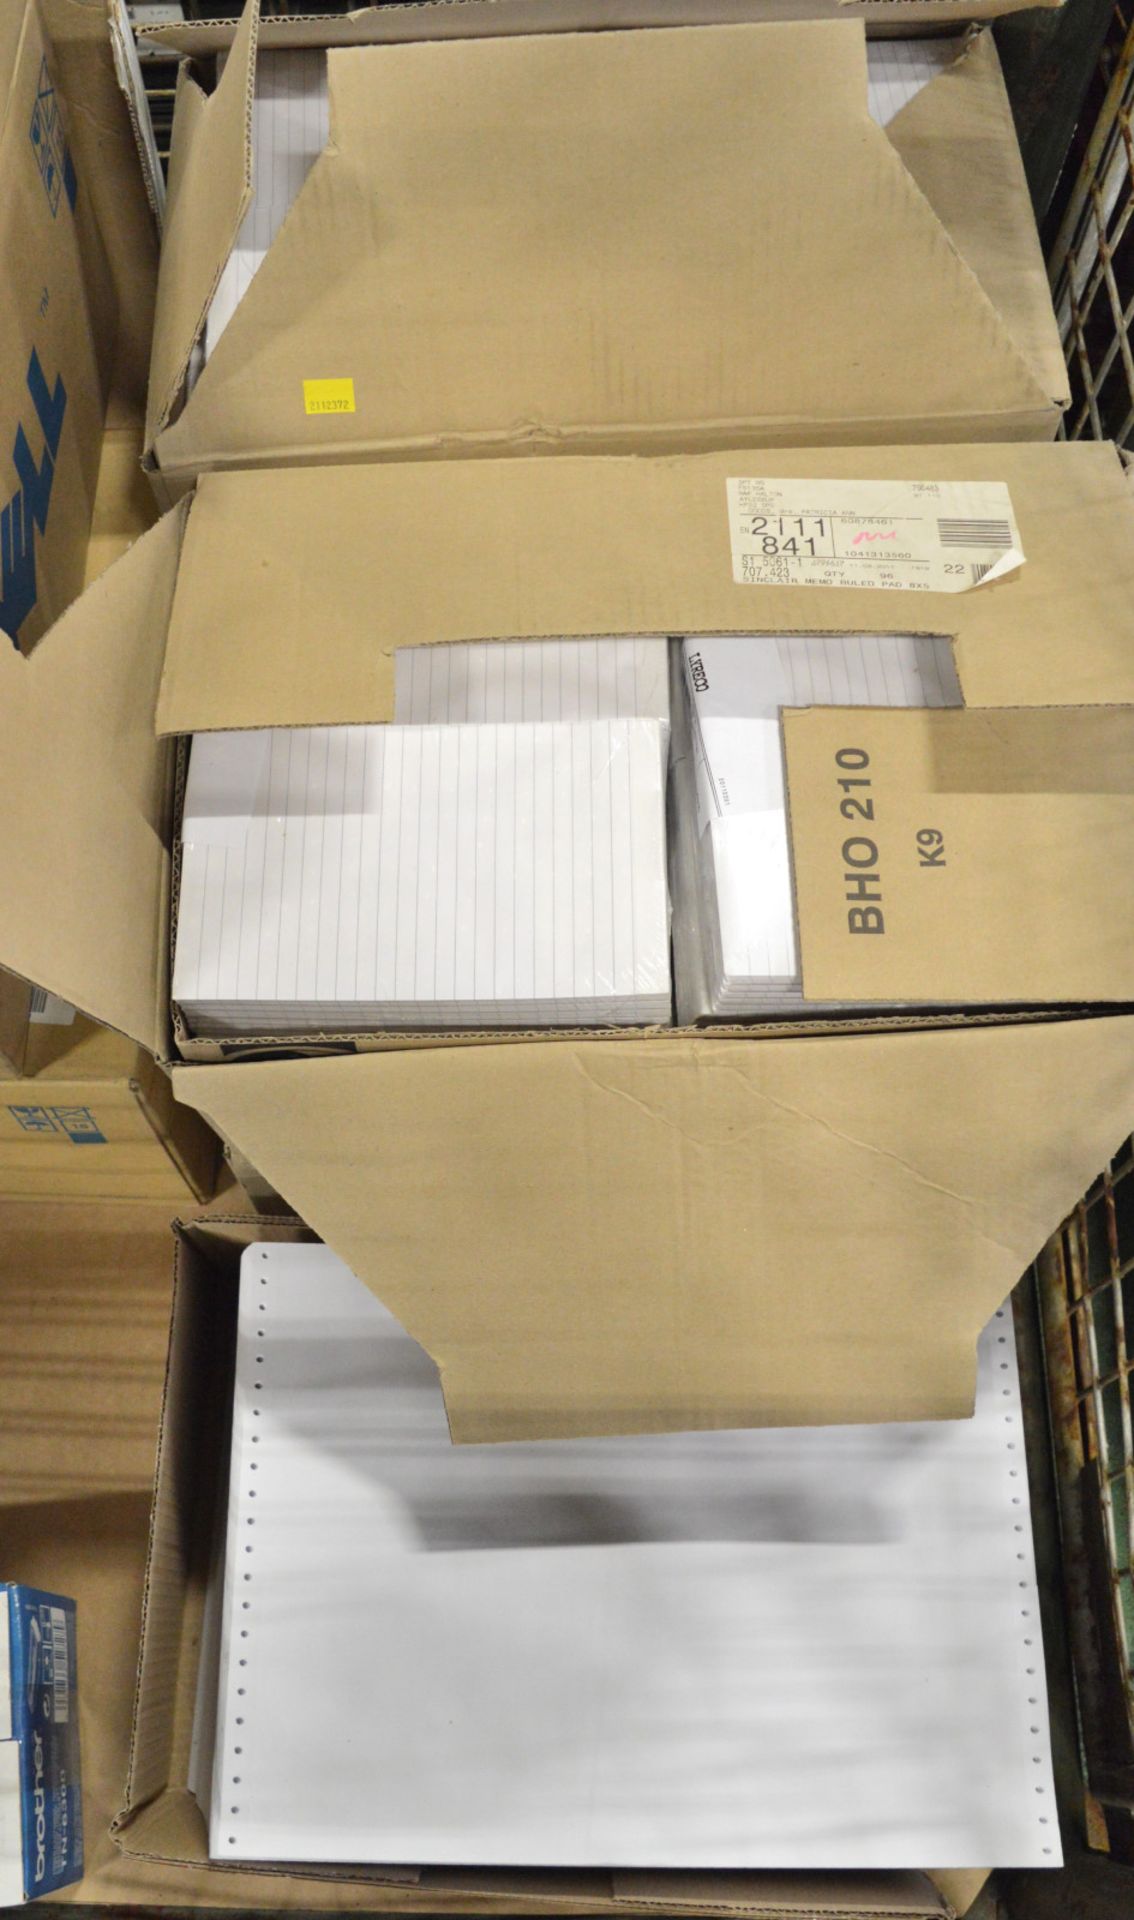 4x Boxes 8x5 Notepads - 96 per box, 1x Box Listing Paper 279x 370 - 2000 sheets, Dell Lase - Image 2 of 3